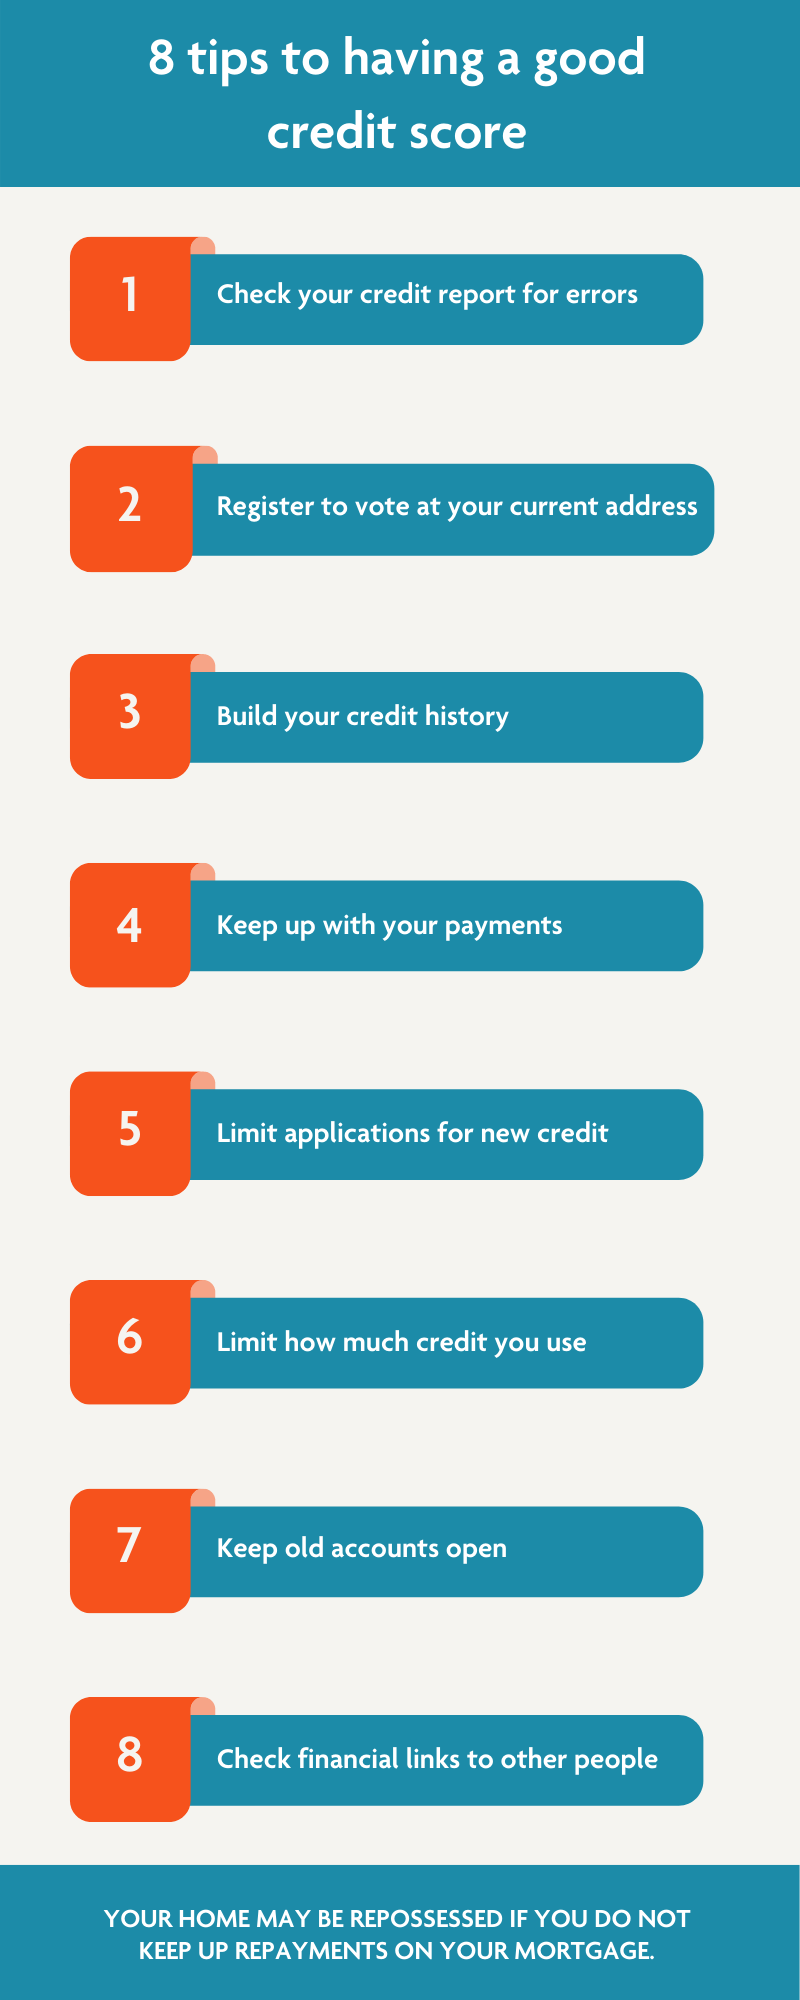 Tips for having a good credit score - Non-Branded.png